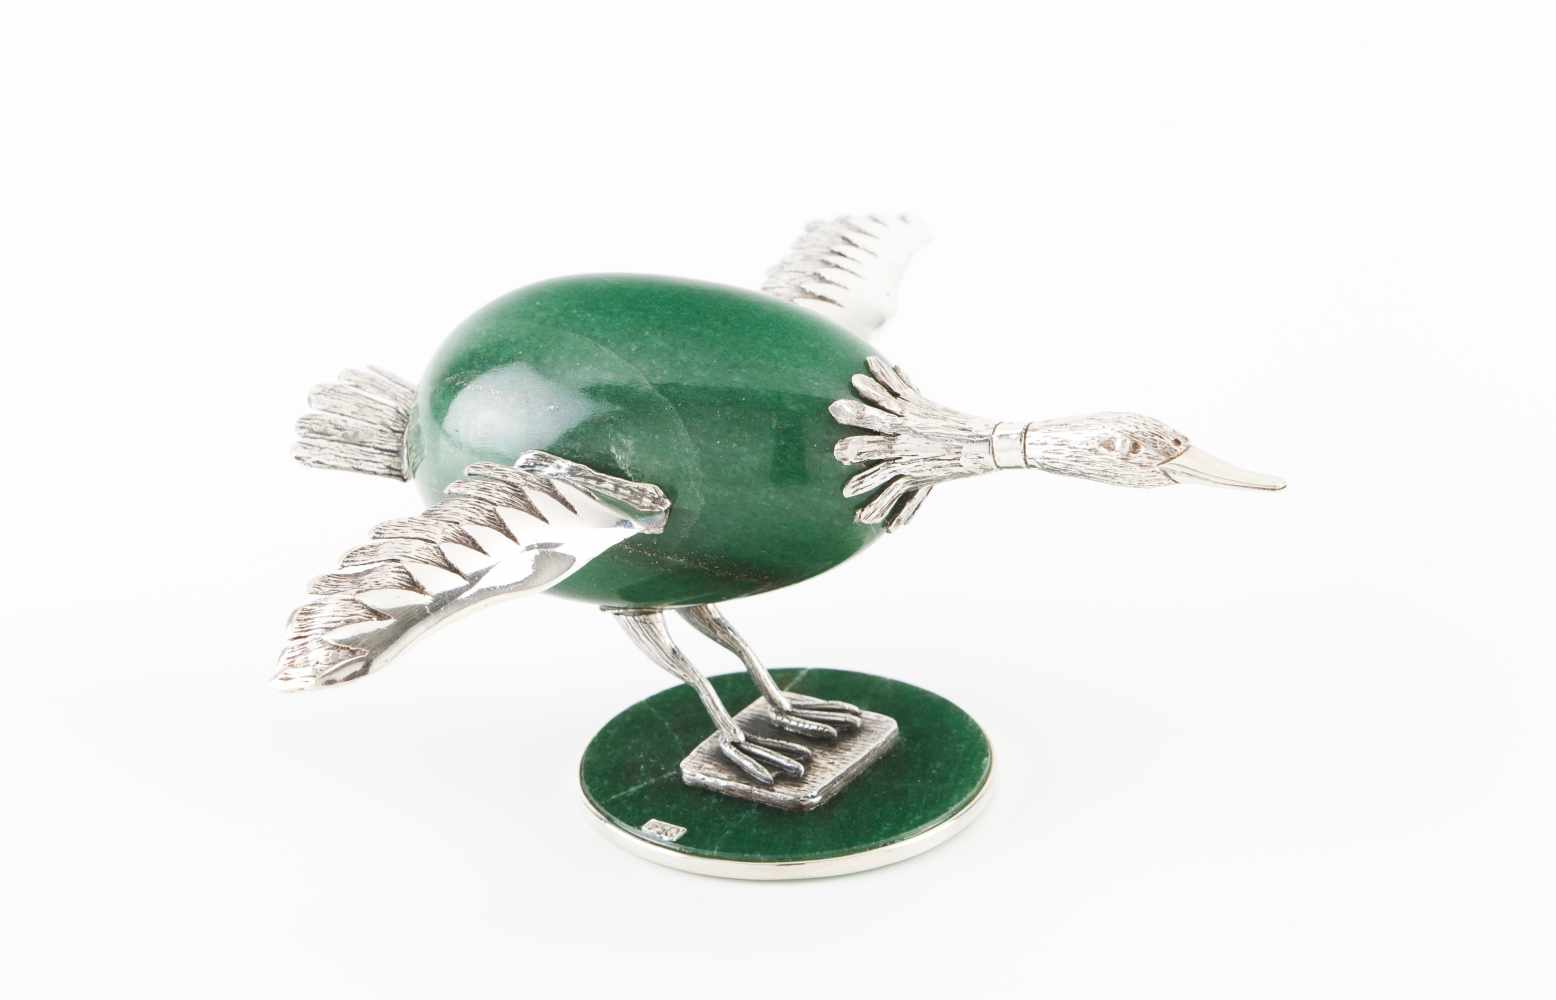 A flying birdPossibly South American silver. Scalloped and chiselled decoration with